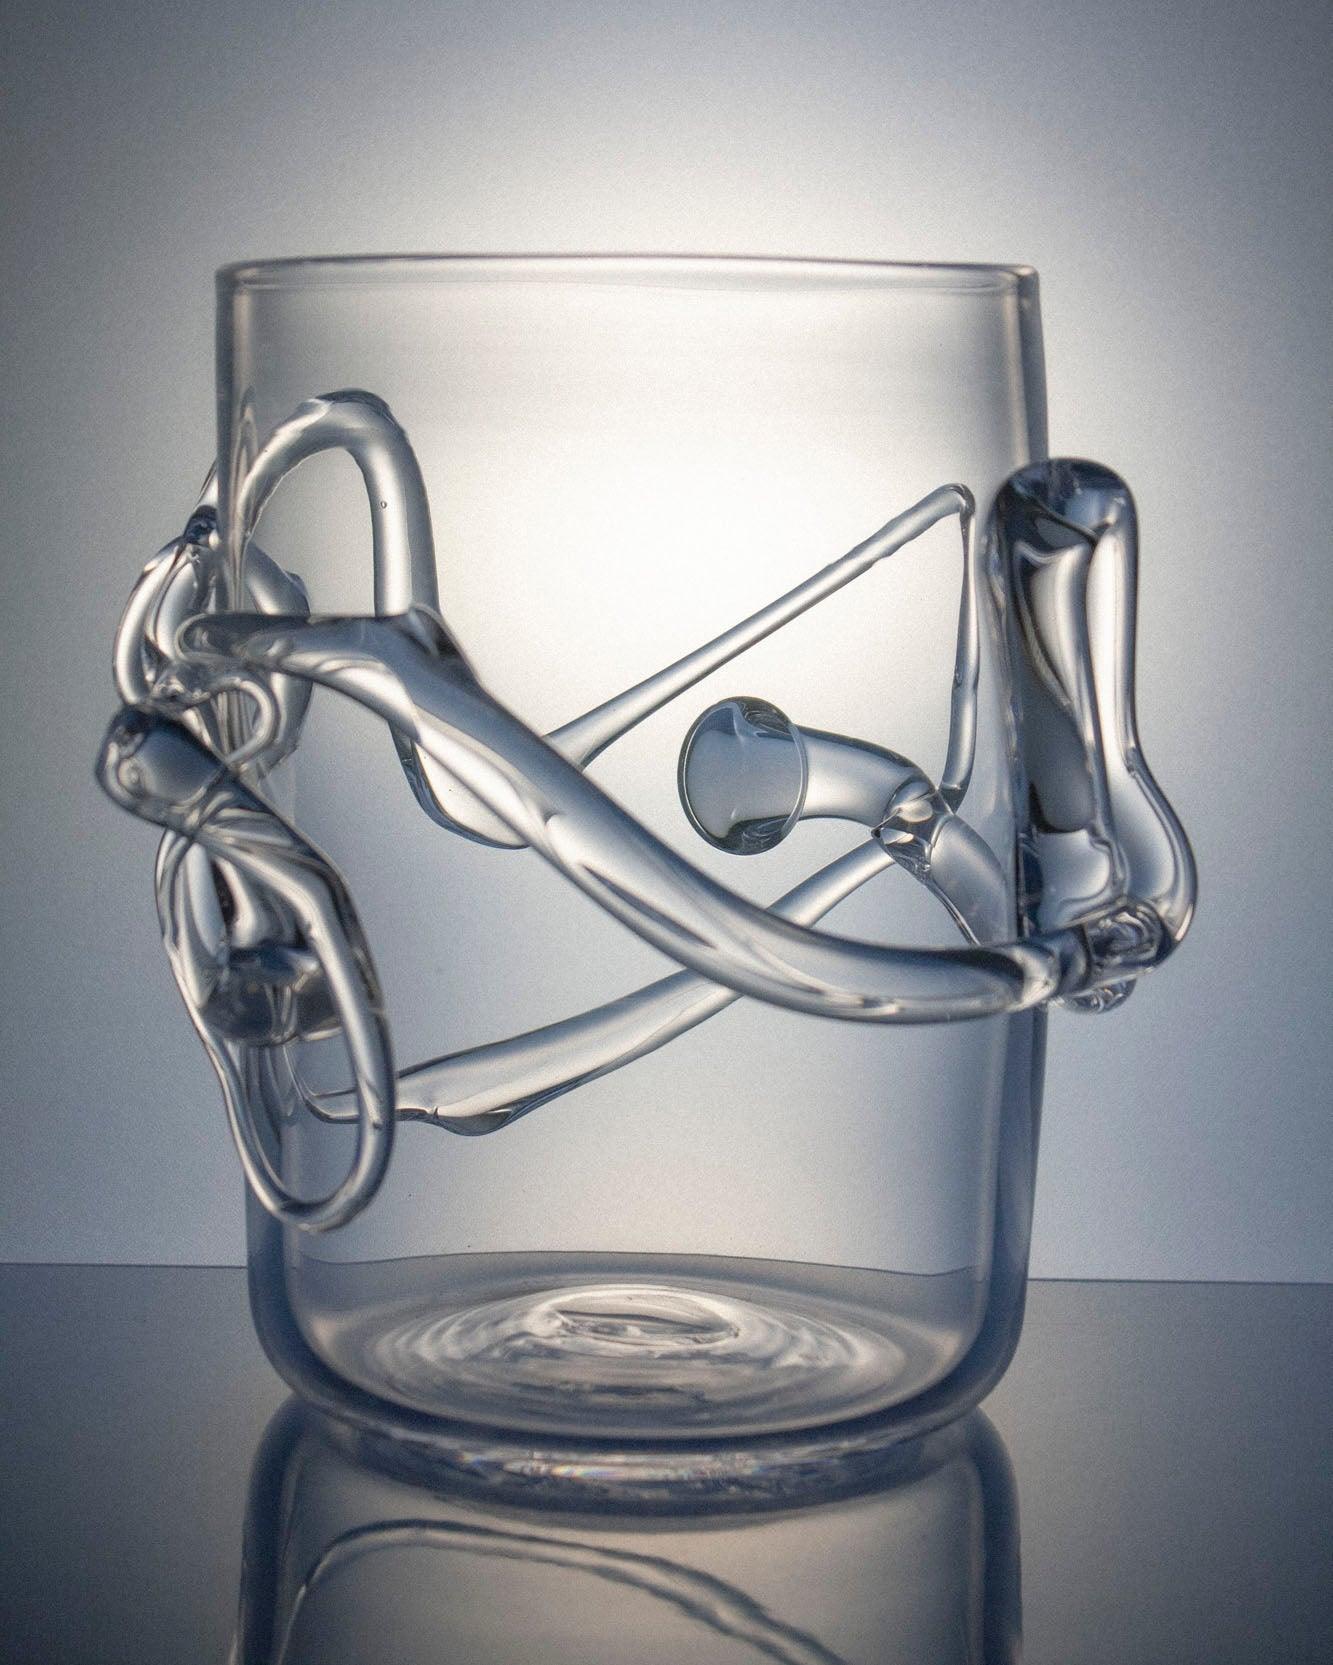 Glass vase with melted glass design on a white and gray shadow background